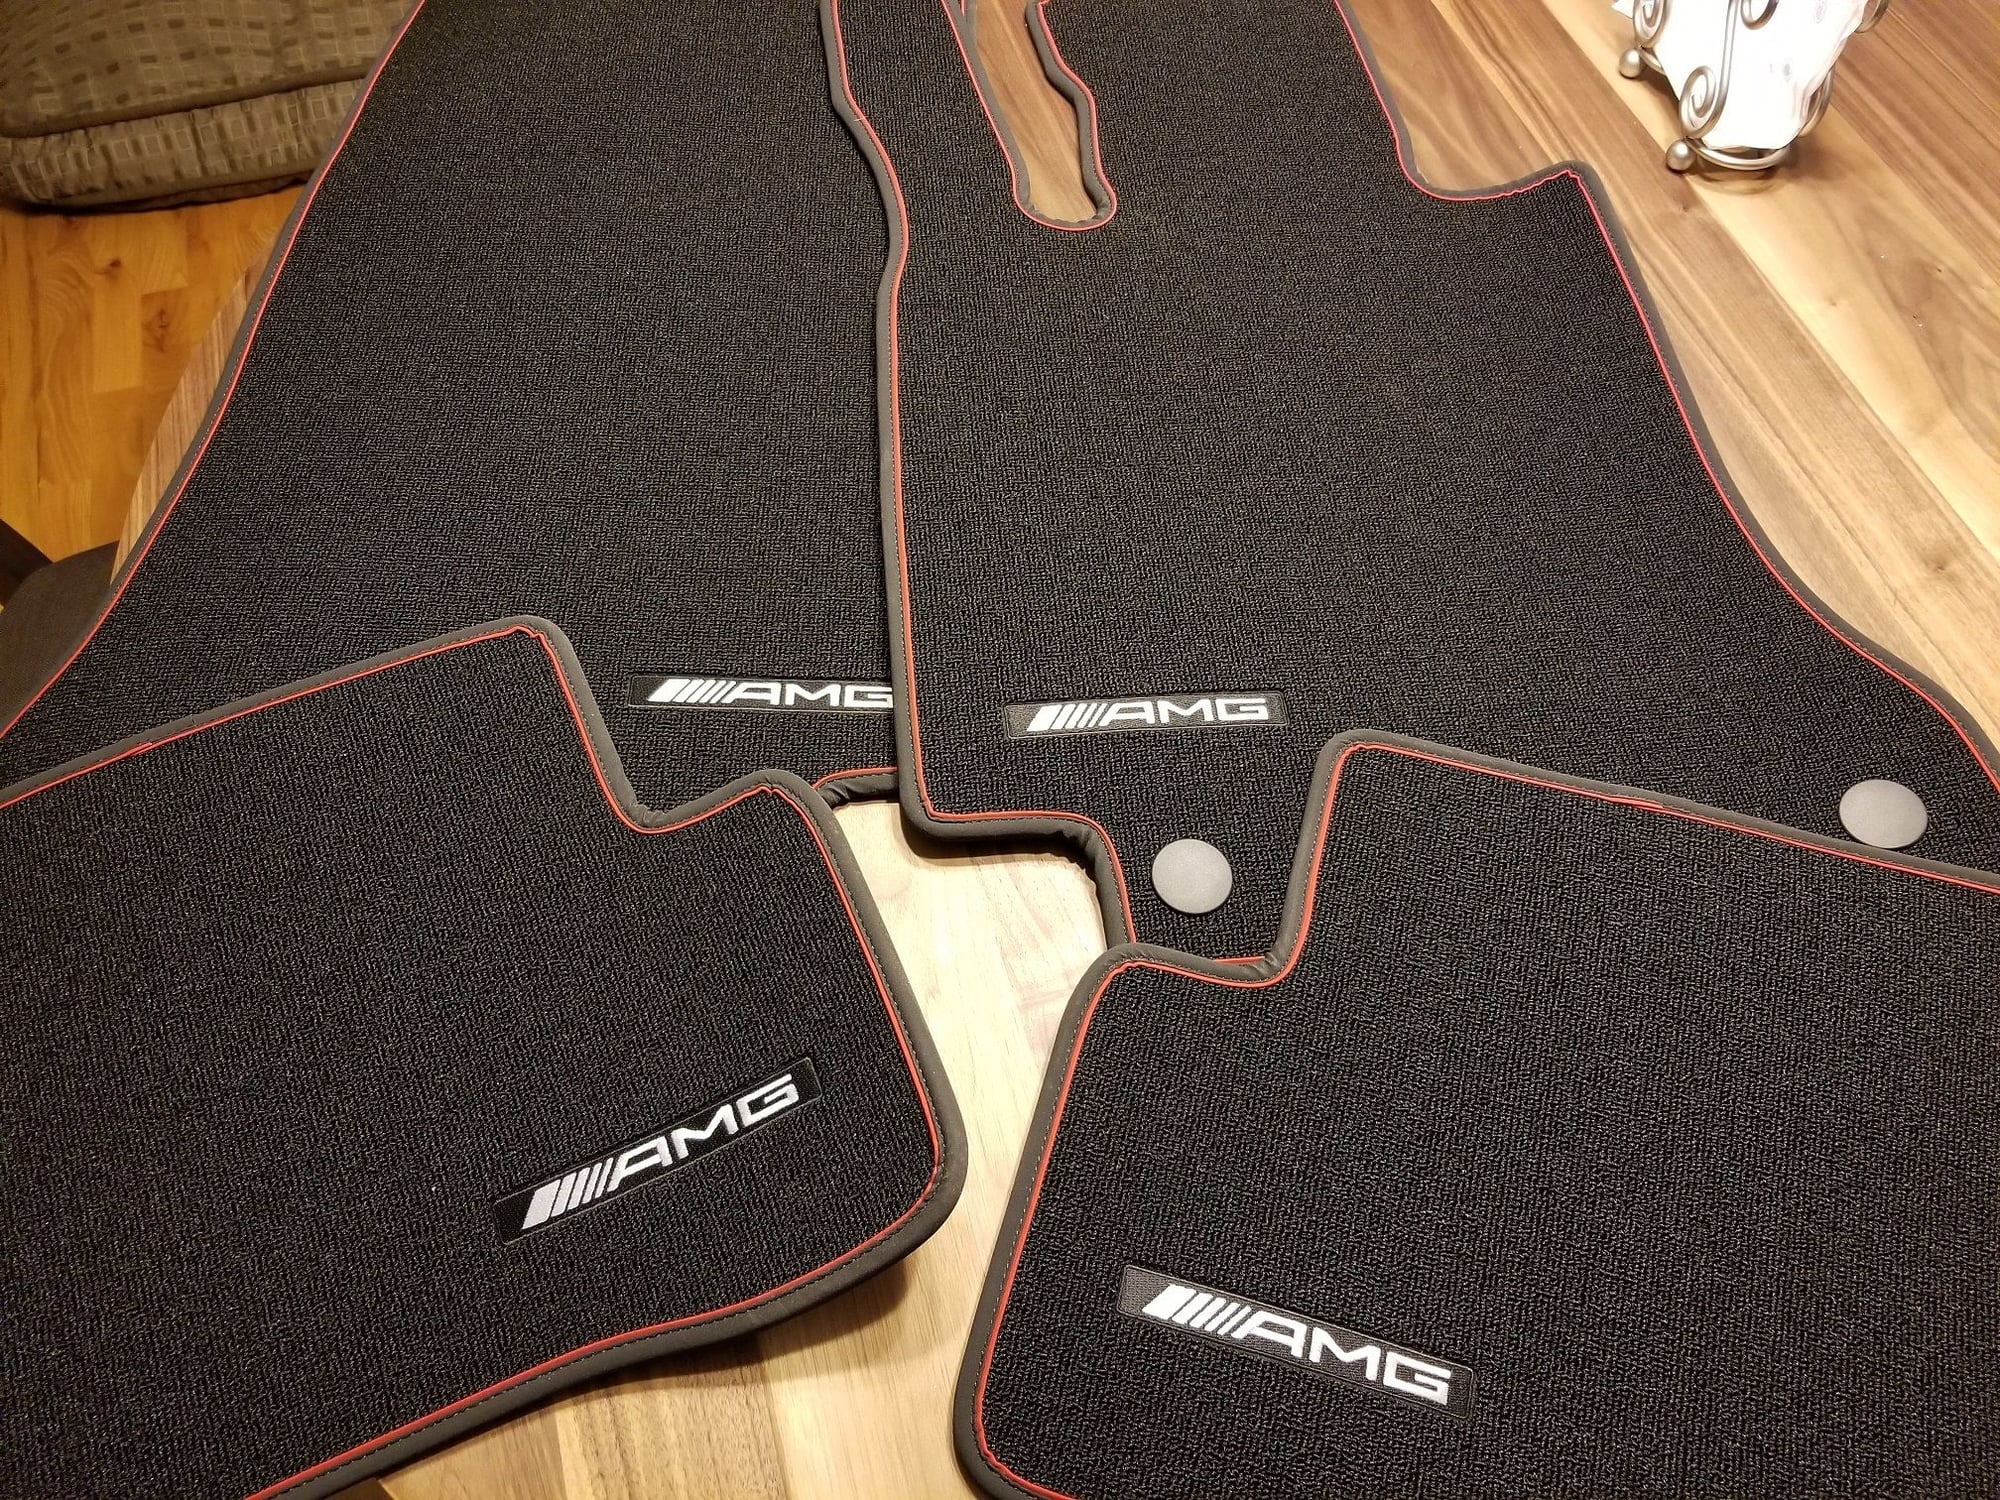 Accessories - W205 OEM AMG floor mats - New - 2016 to 2018 Mercedes-Benz C63 AMG S - 2017 to 2018 Mercedes-Benz C43 AMG - 2016 Mercedes-Benz C450 AMG - 2015 Mercedes-Benz C400 - 2015 to 2018 Mercedes-Benz C300 - Aurora, CO 80016, United States